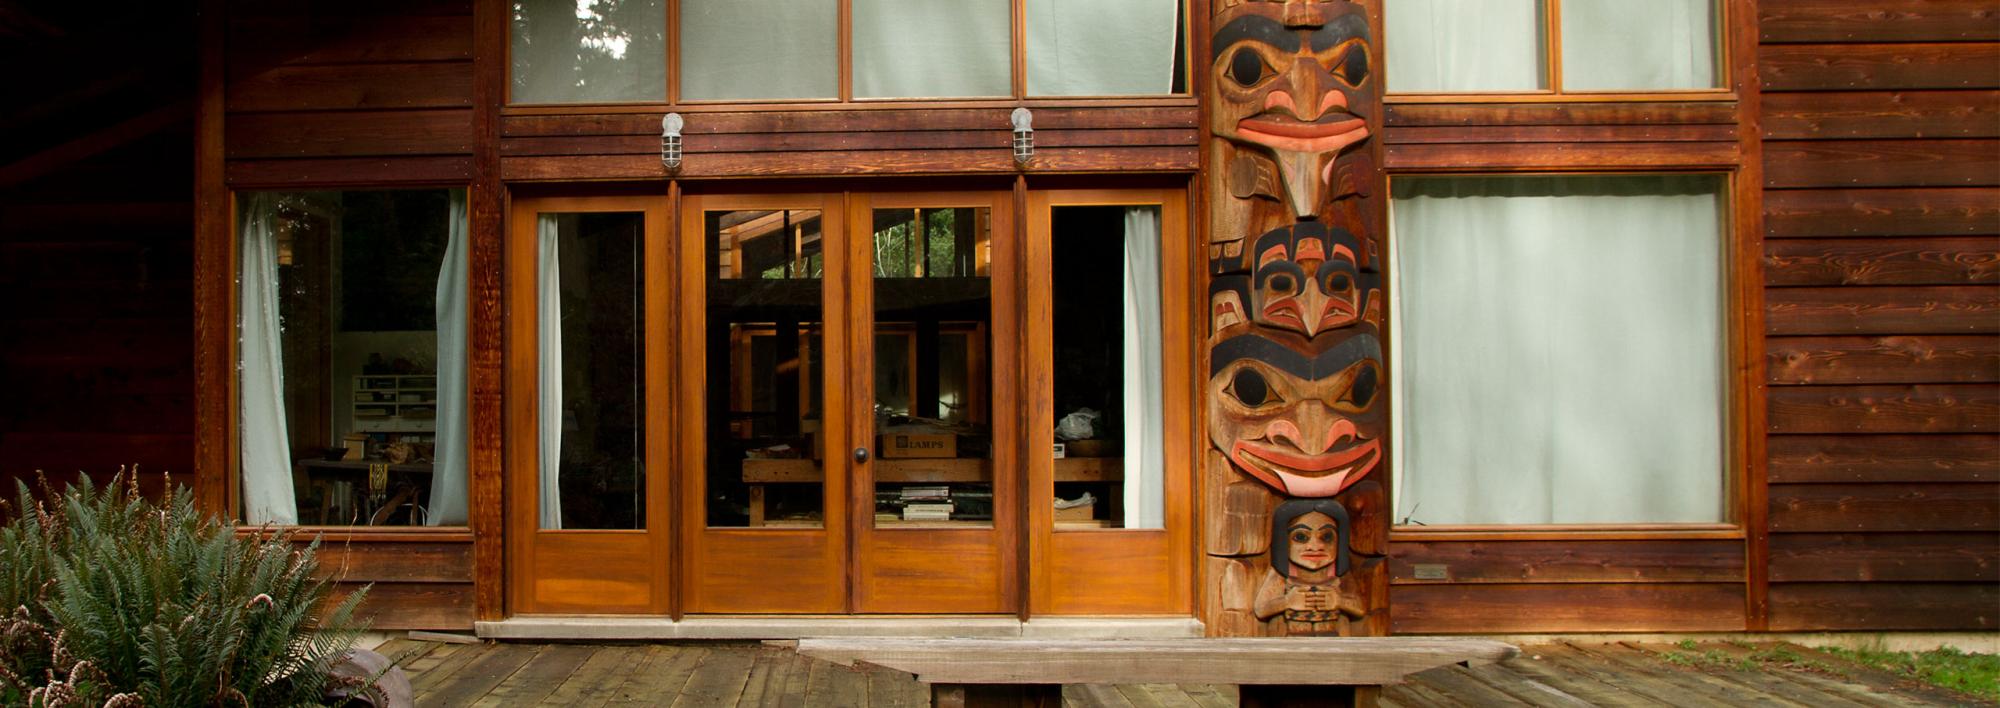 front of a rustic gallery building with glass doors and carved totems